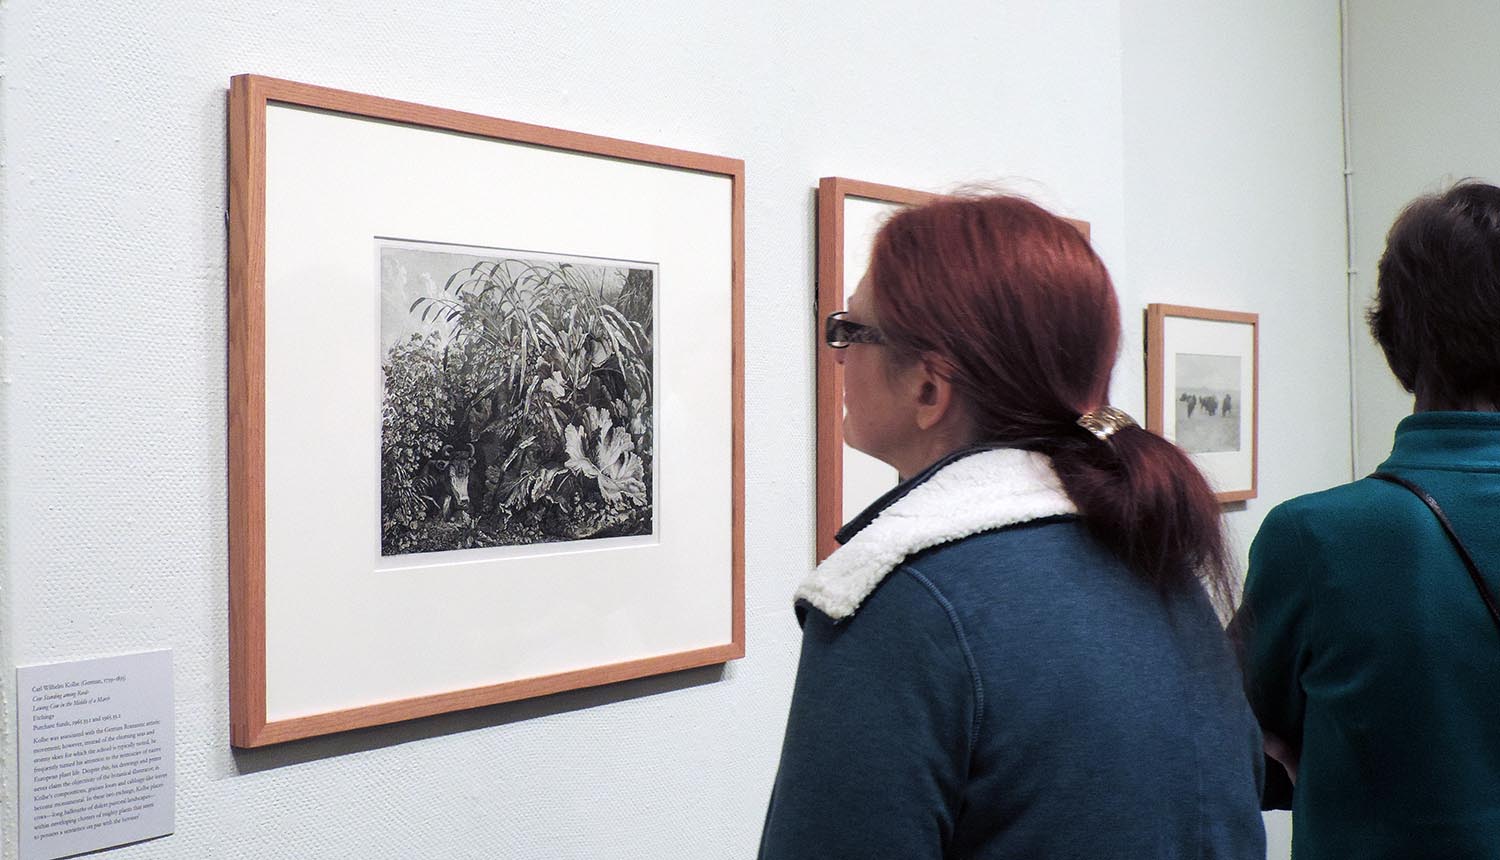 The exhibit encourages visitors to consider the various ways in which humans see and interpret animals, who are not able to represent themselves through art.